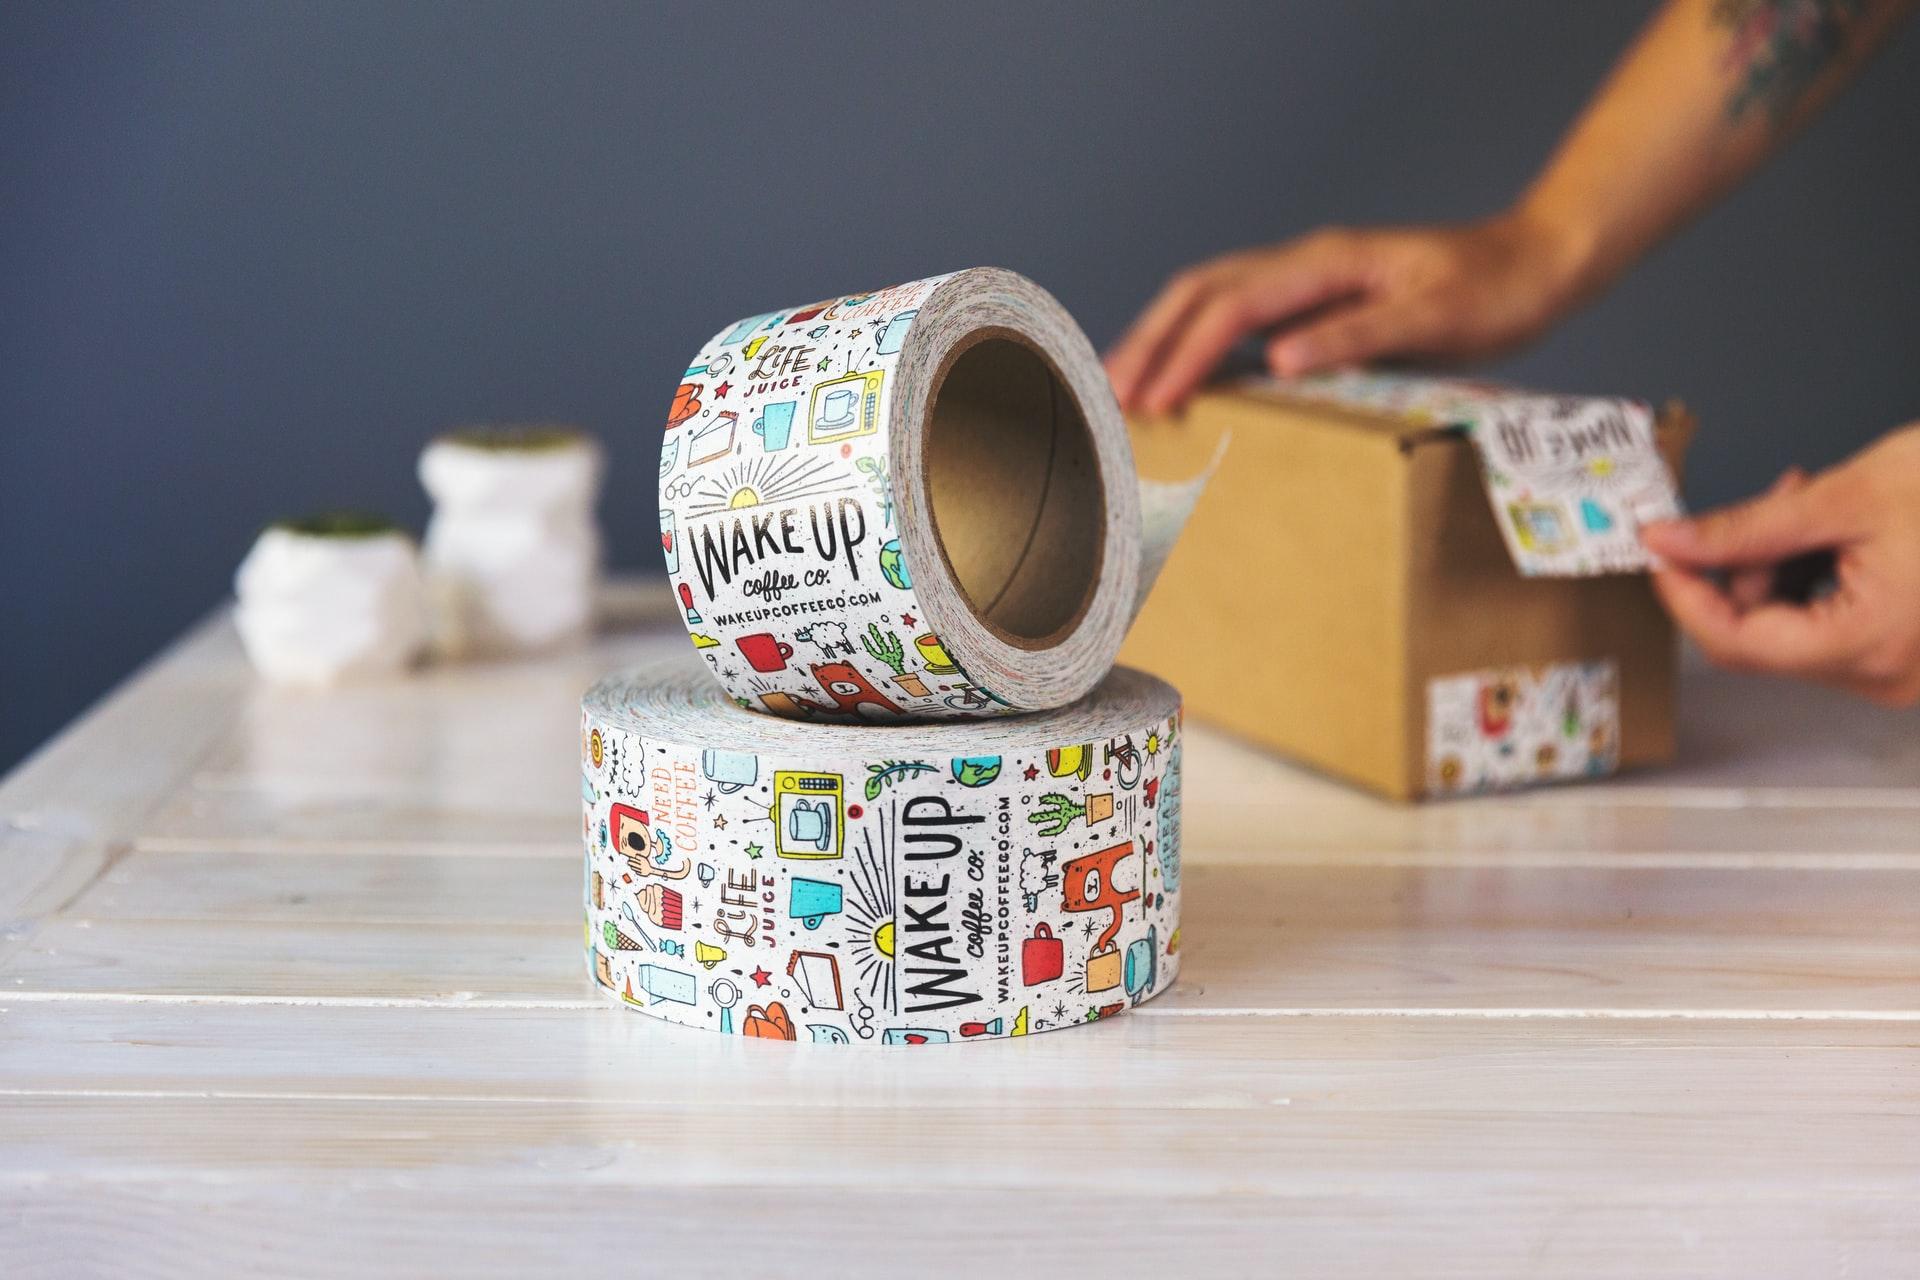 Gaffer Tape Buying Guide - Types, Sizes and Uses